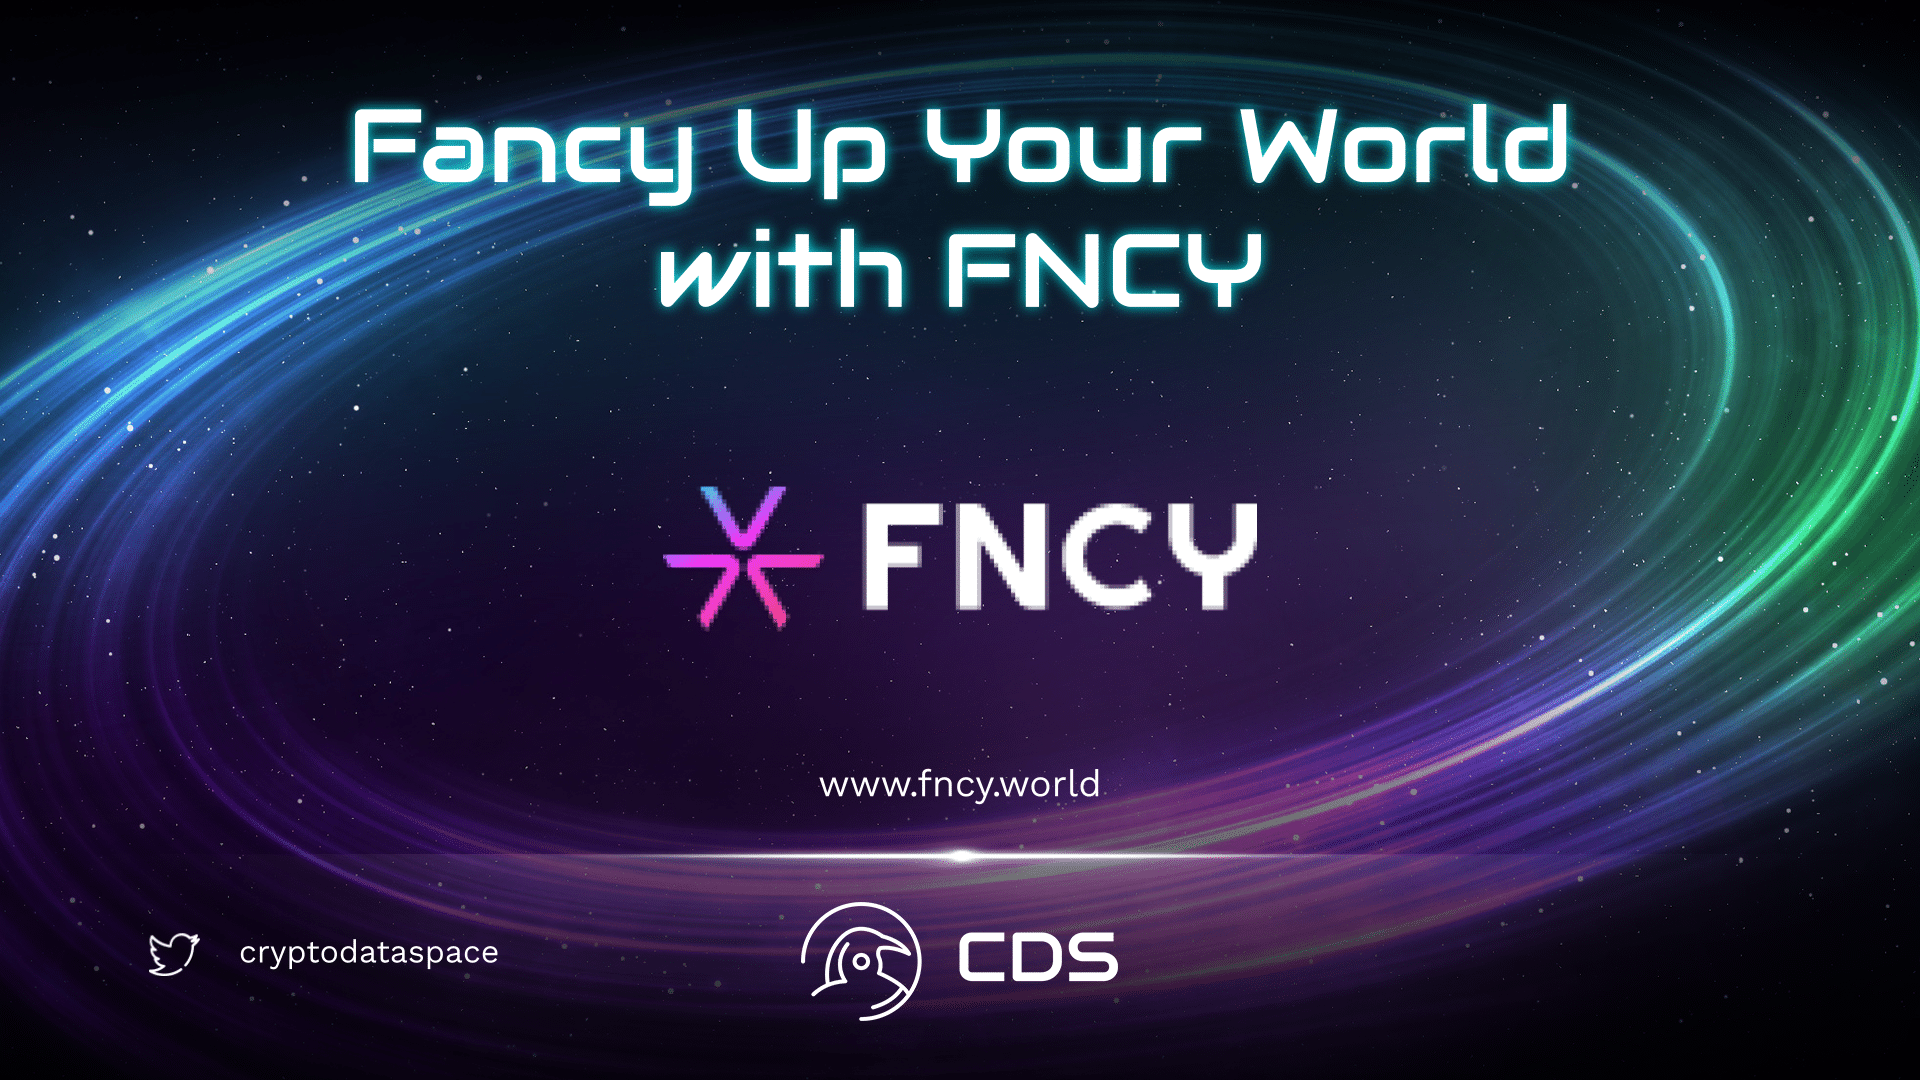 Fancy Up Your World with FNCY